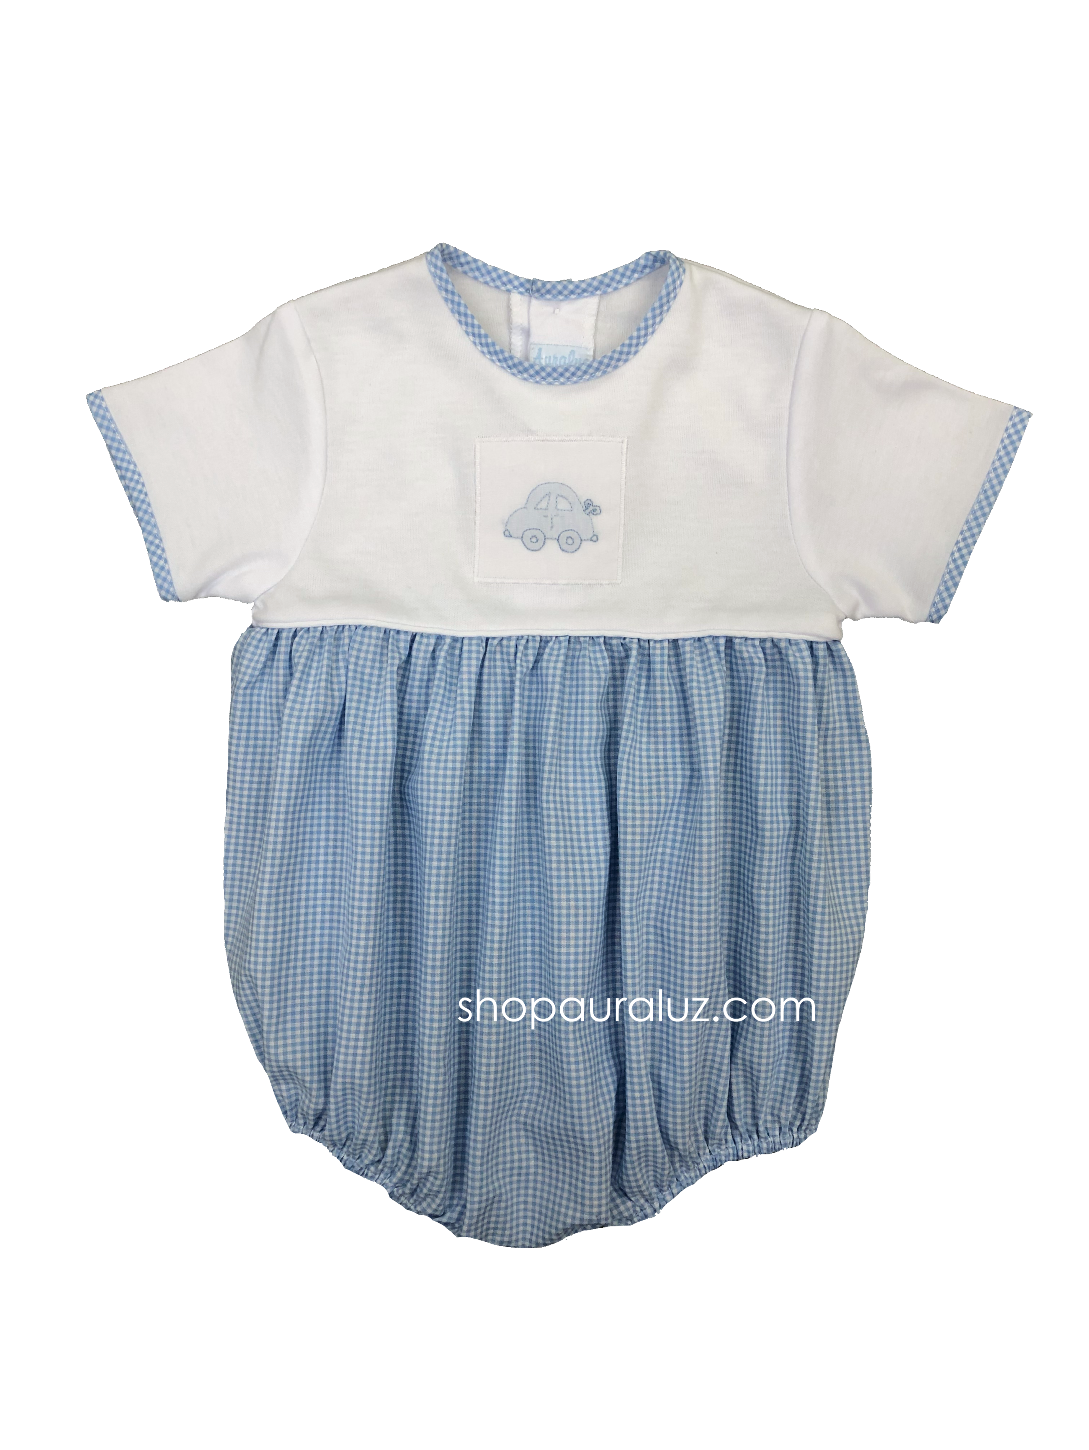 Auraluz Knit/Blue Check Boy Bubble...no collar and embroidered wind up cars